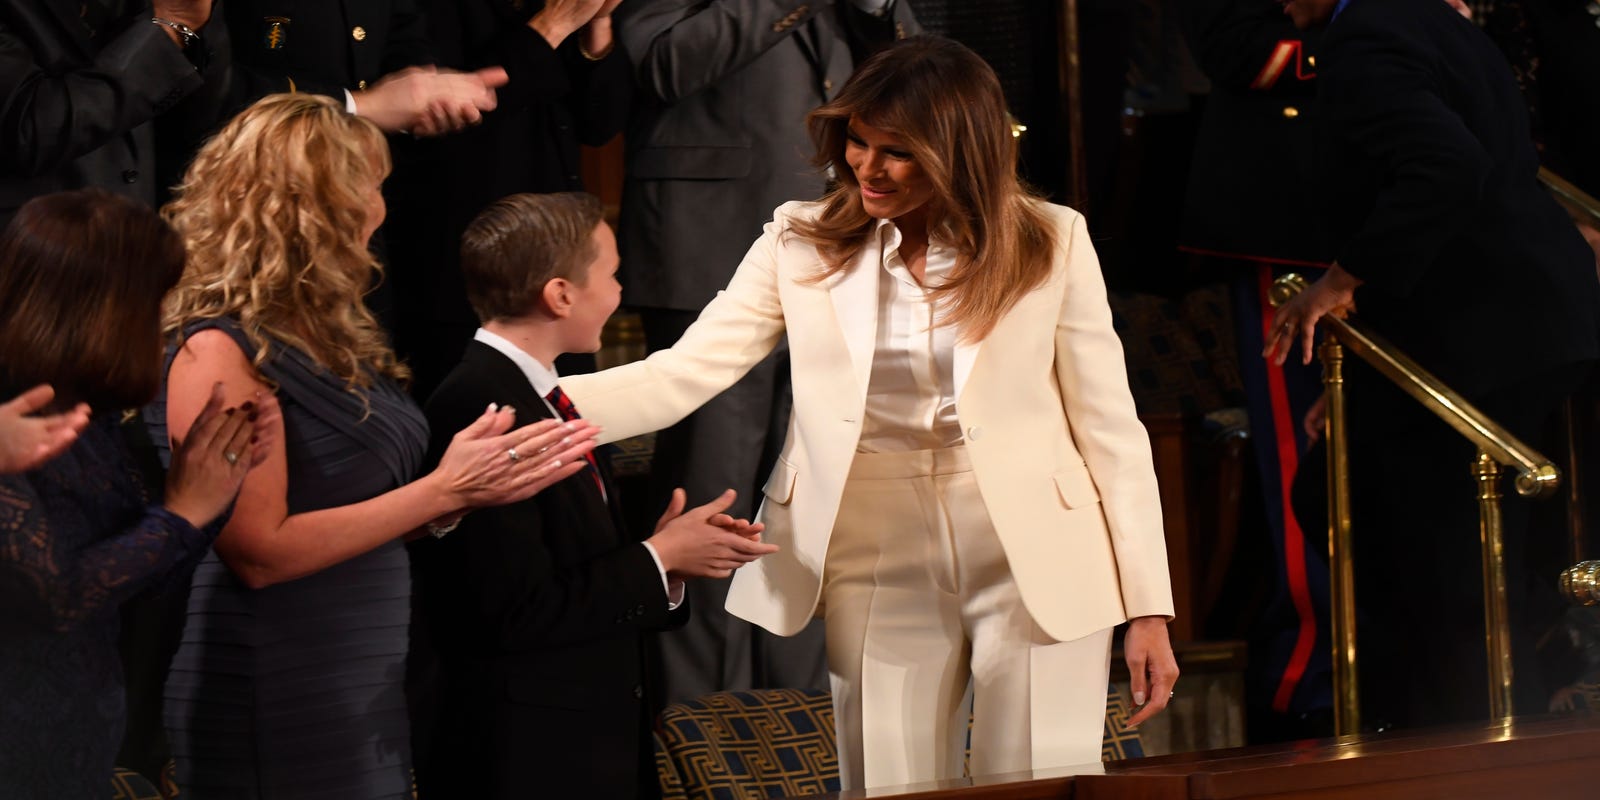 Www Xxx Cp - For State of the Union, Melania Trump goes for all-white pants suit